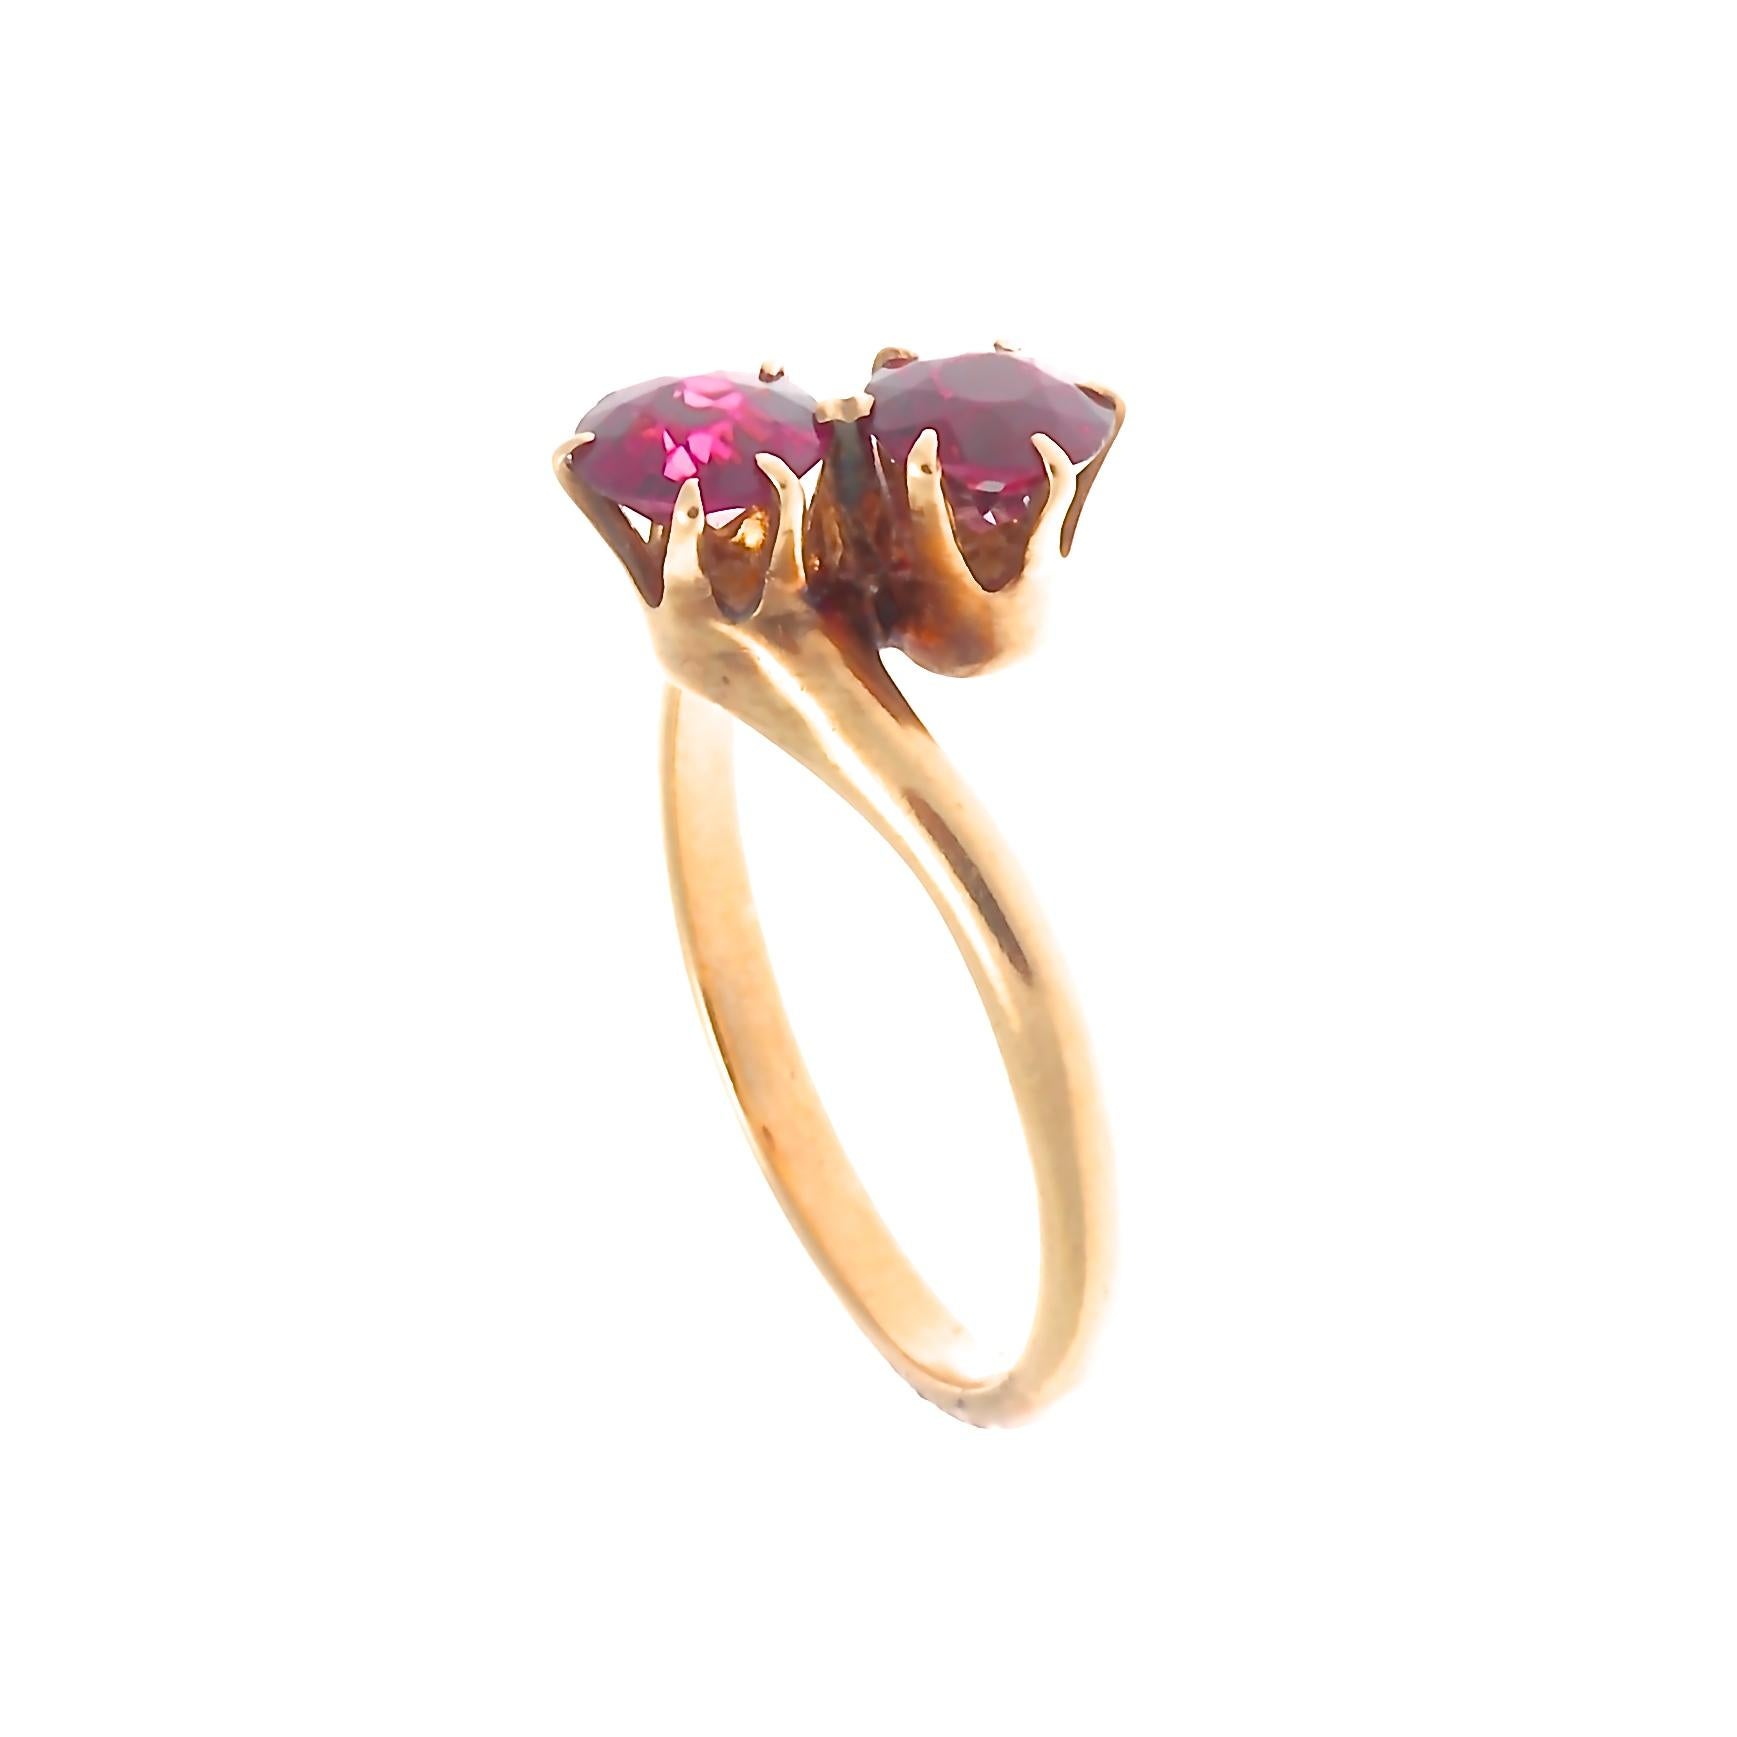 Elegance through simplicity. Featuring two glowing garnets embracing through swooping design. Crafted in 14k gold. Ring size 8-1/4 and can easily be resized to fit, if needed this would come complimentary with your purchase.